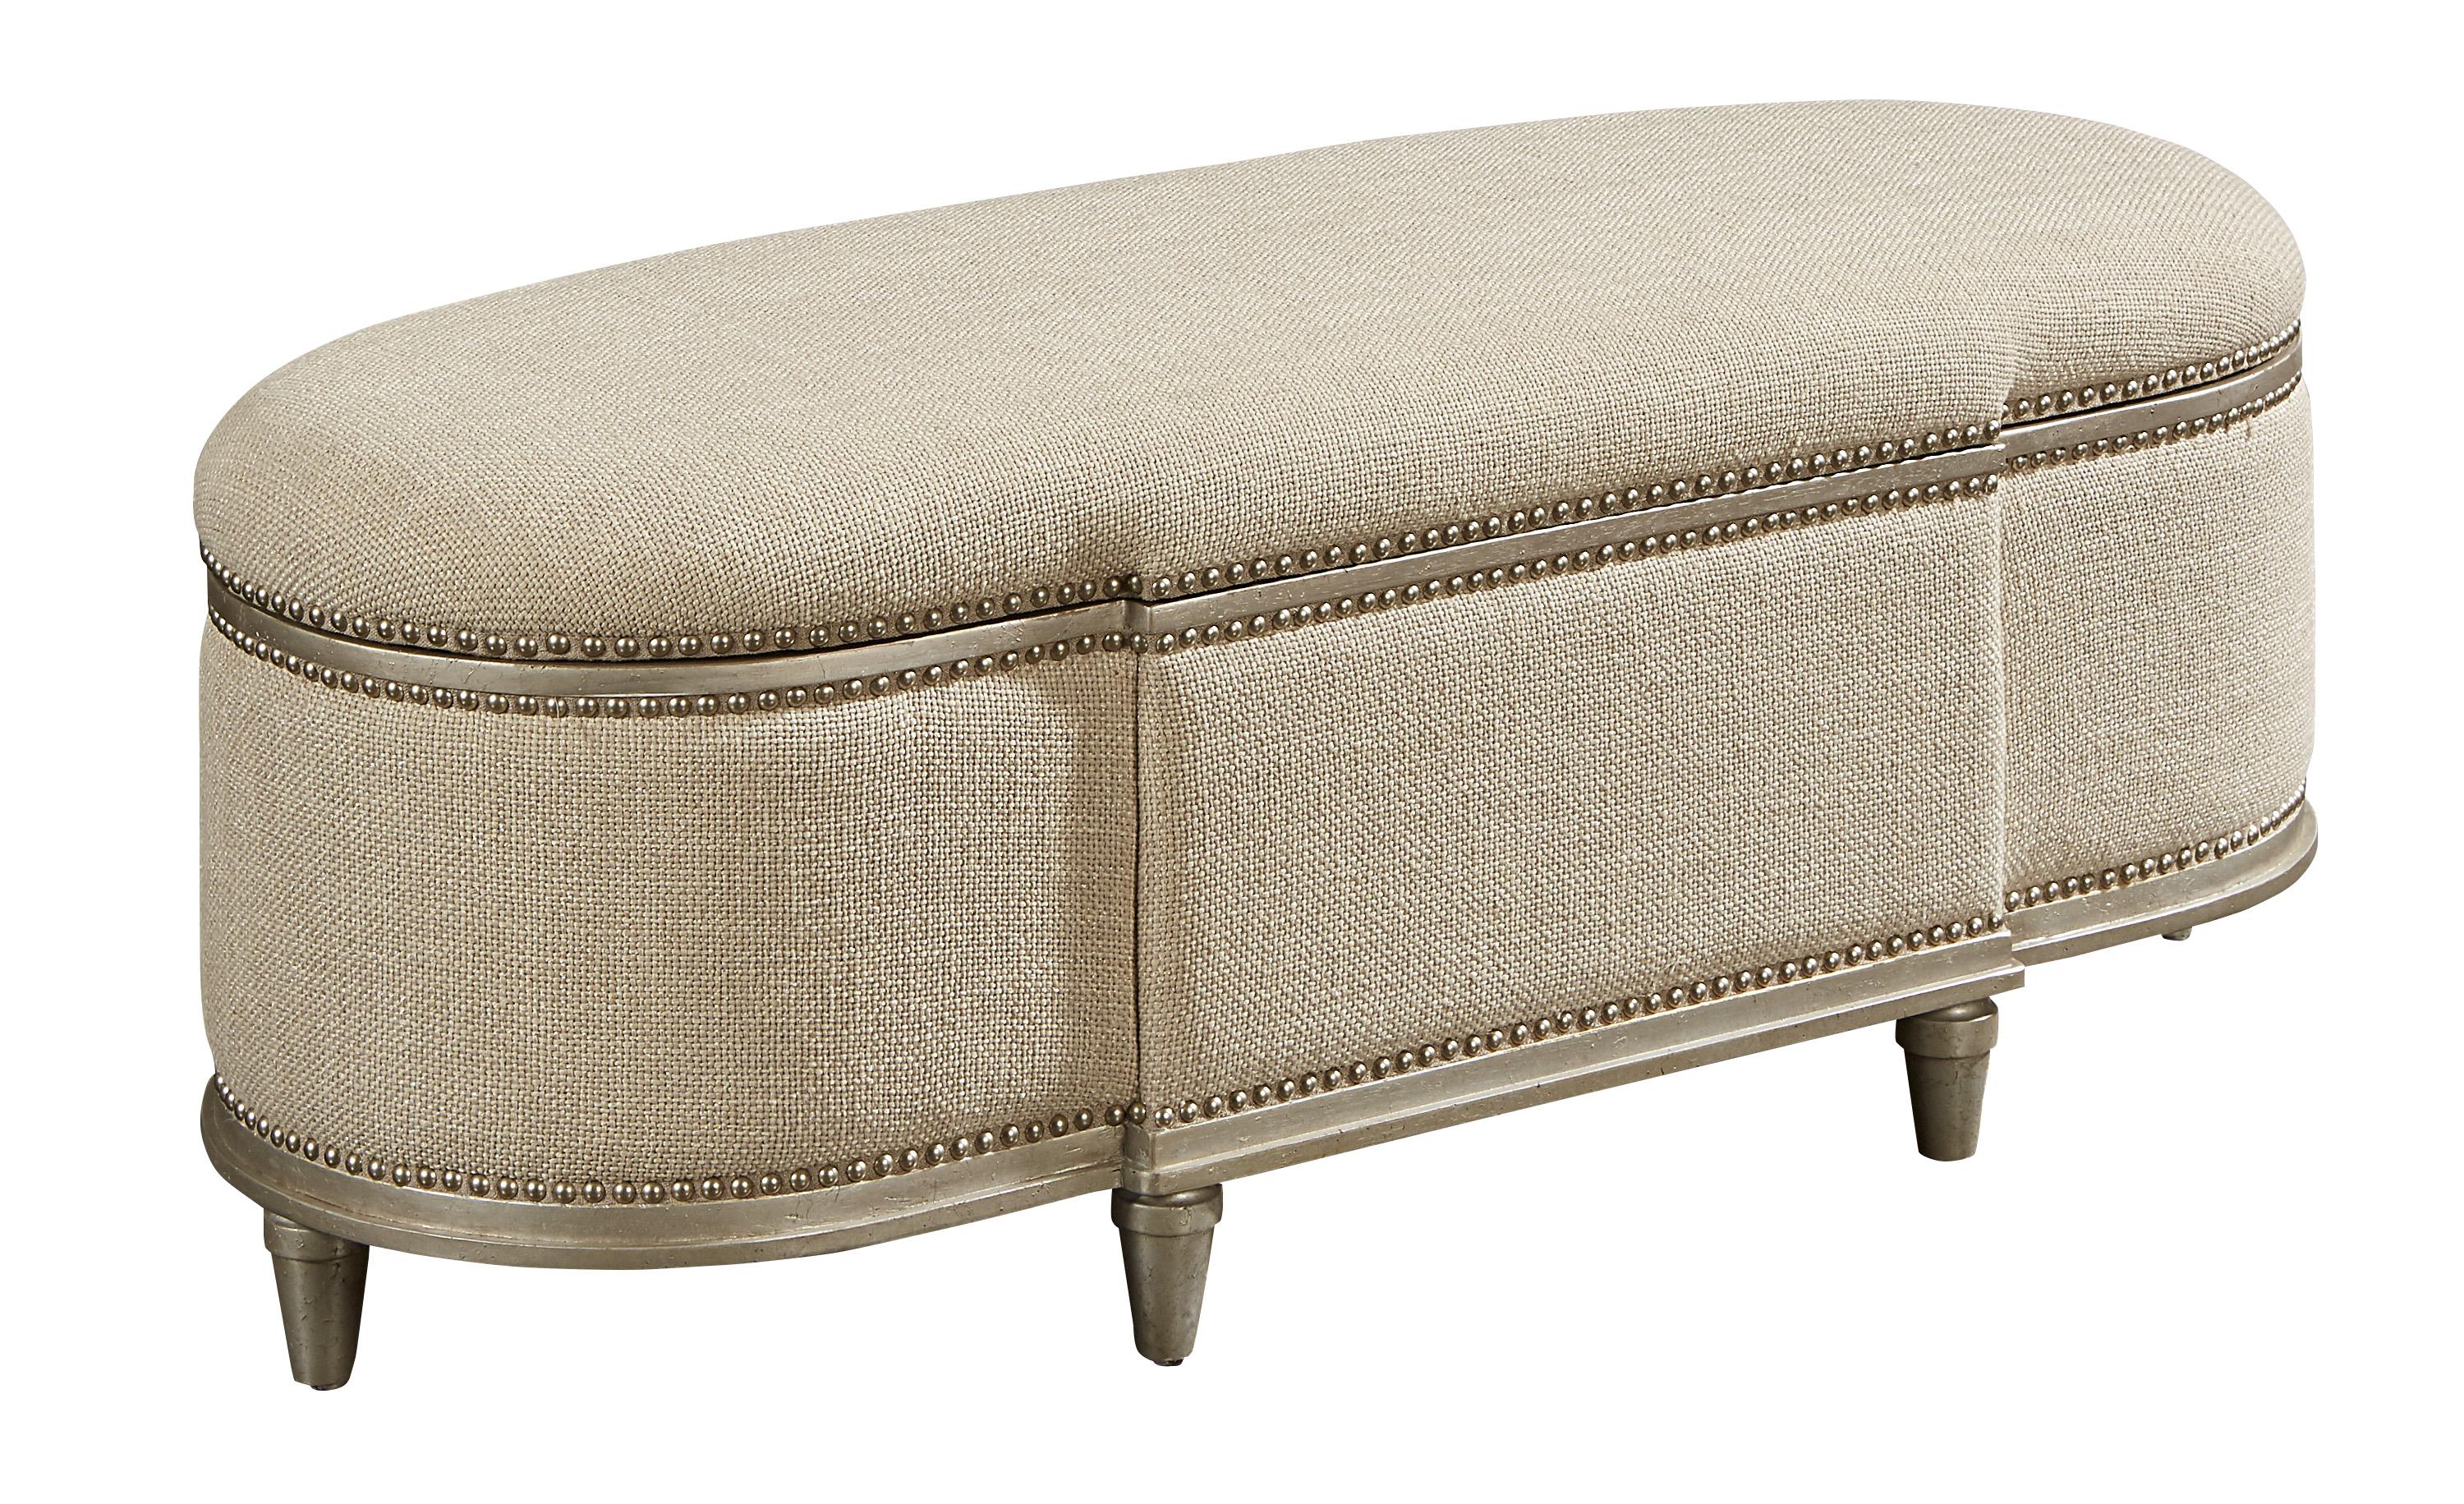 Transitional Bench Morrissey 218149-2727 in Beige Fabric